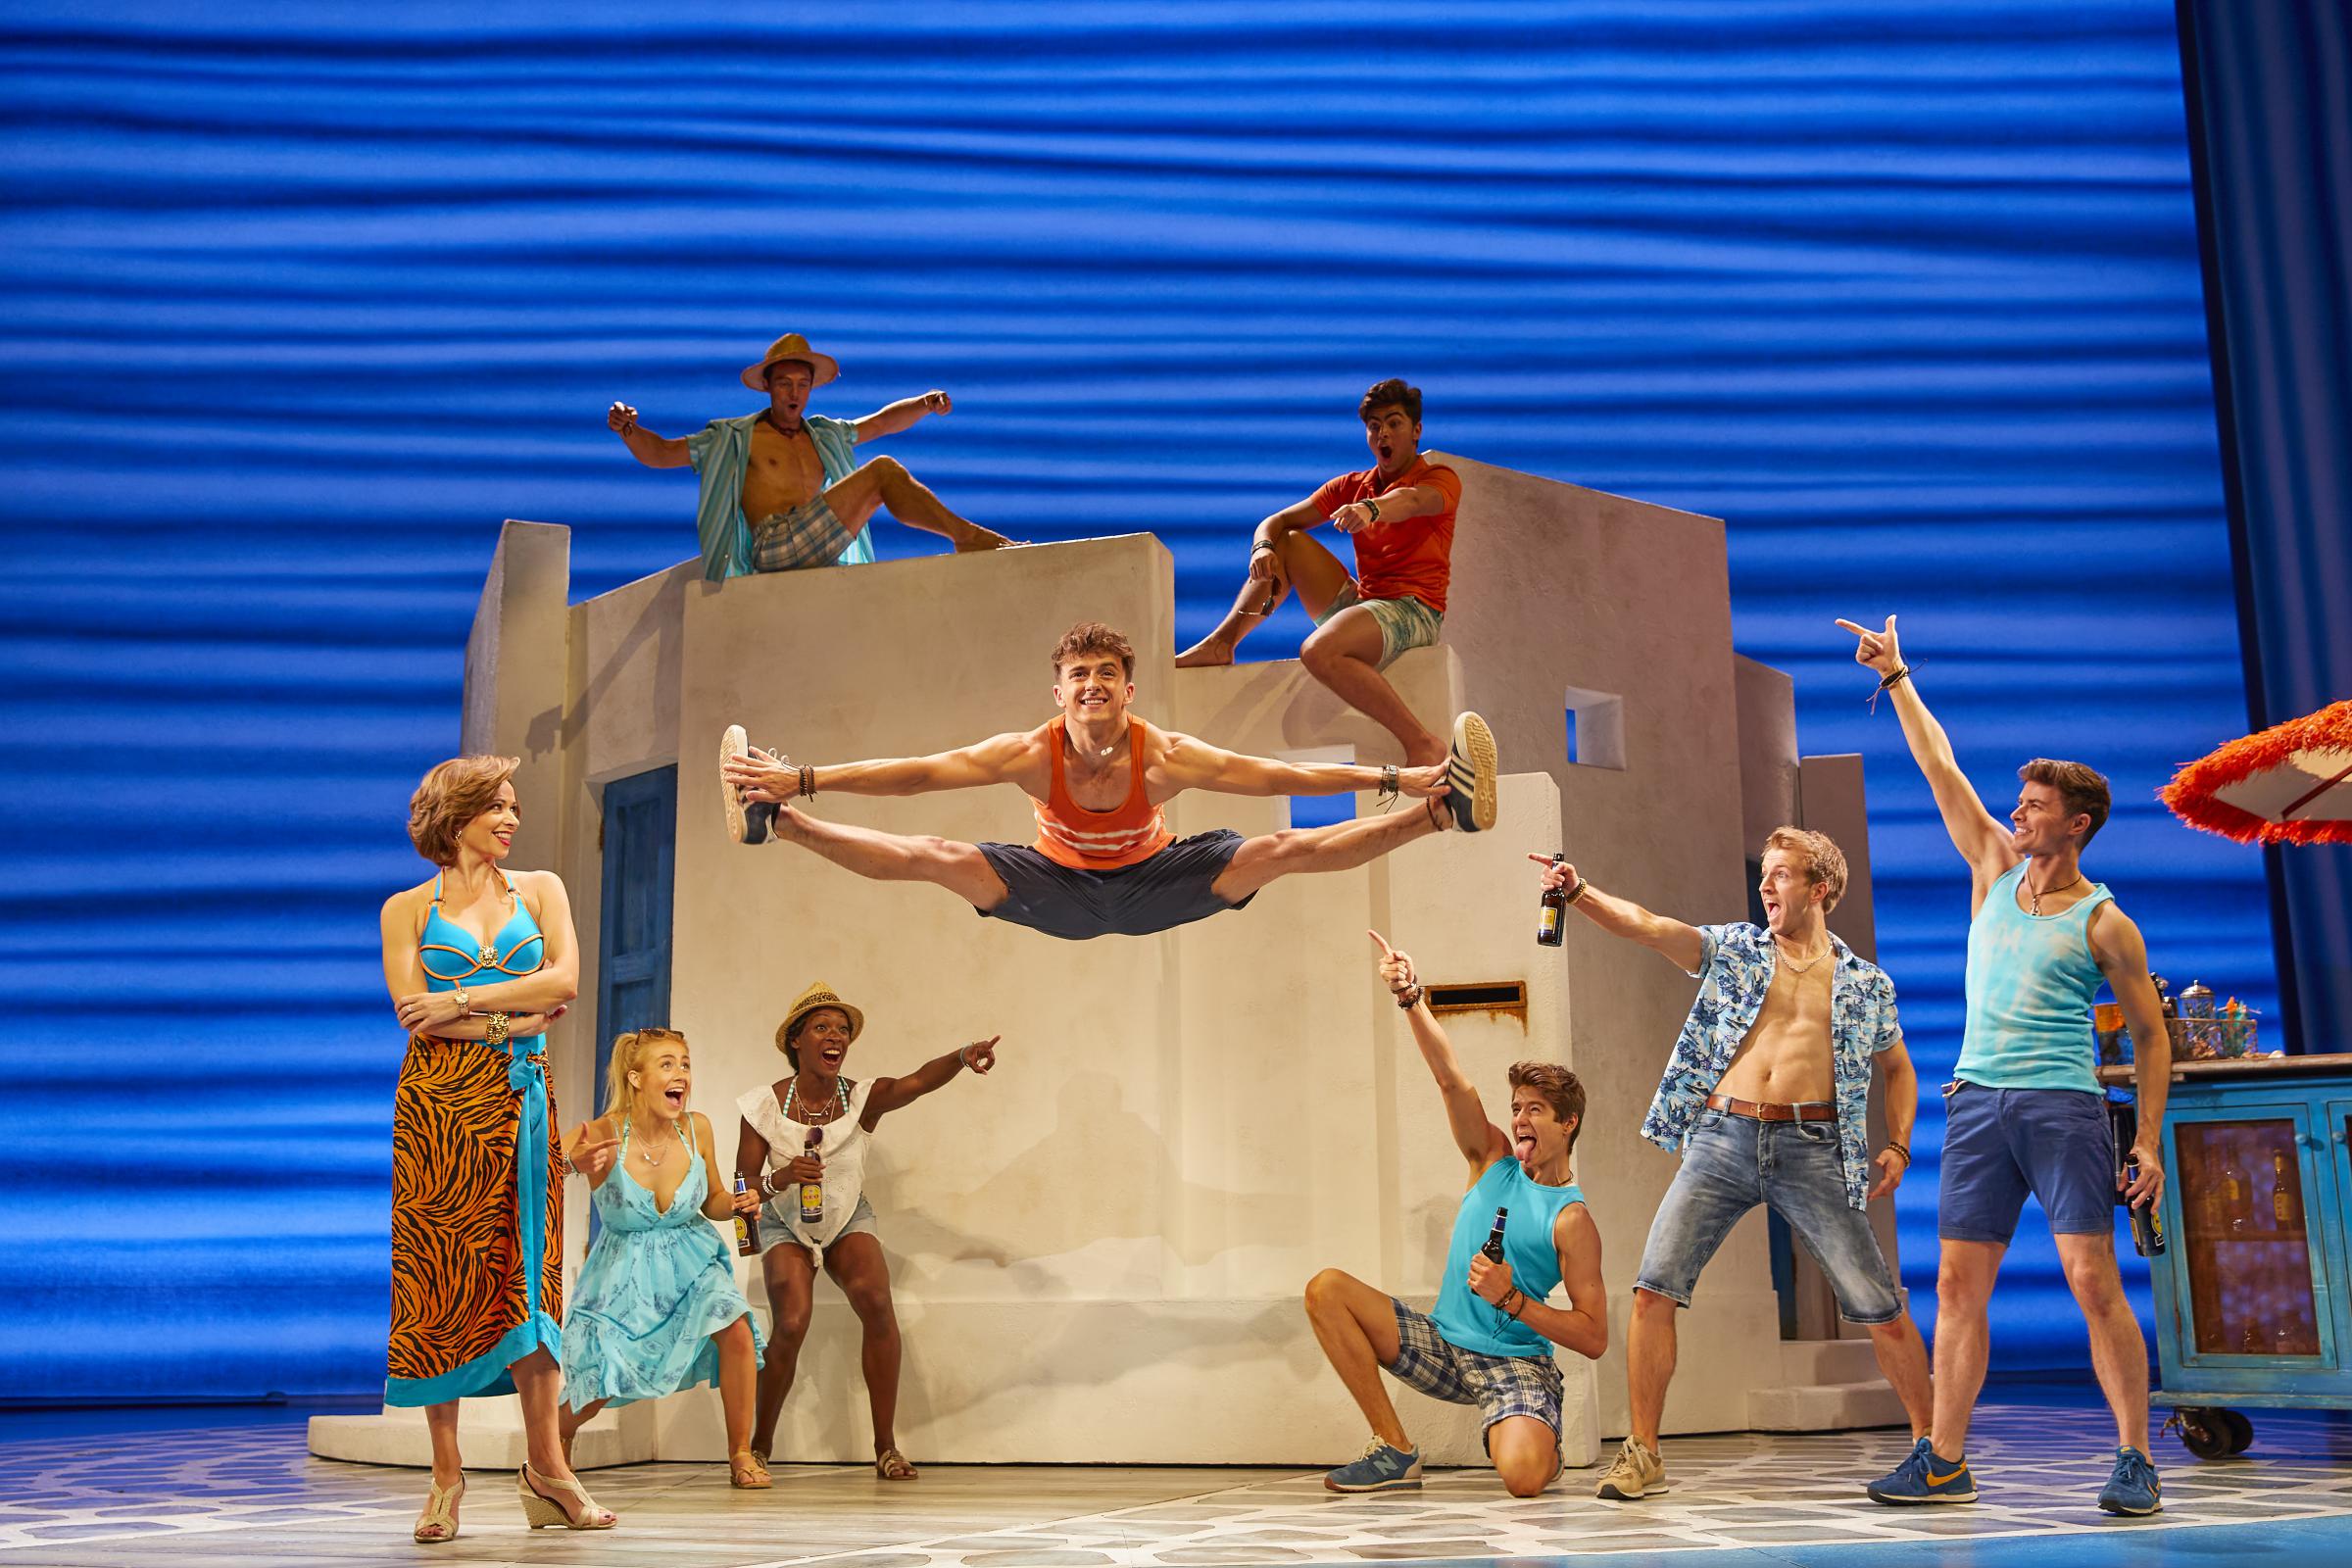 Mamma Mia! delights packed Alhambra audience